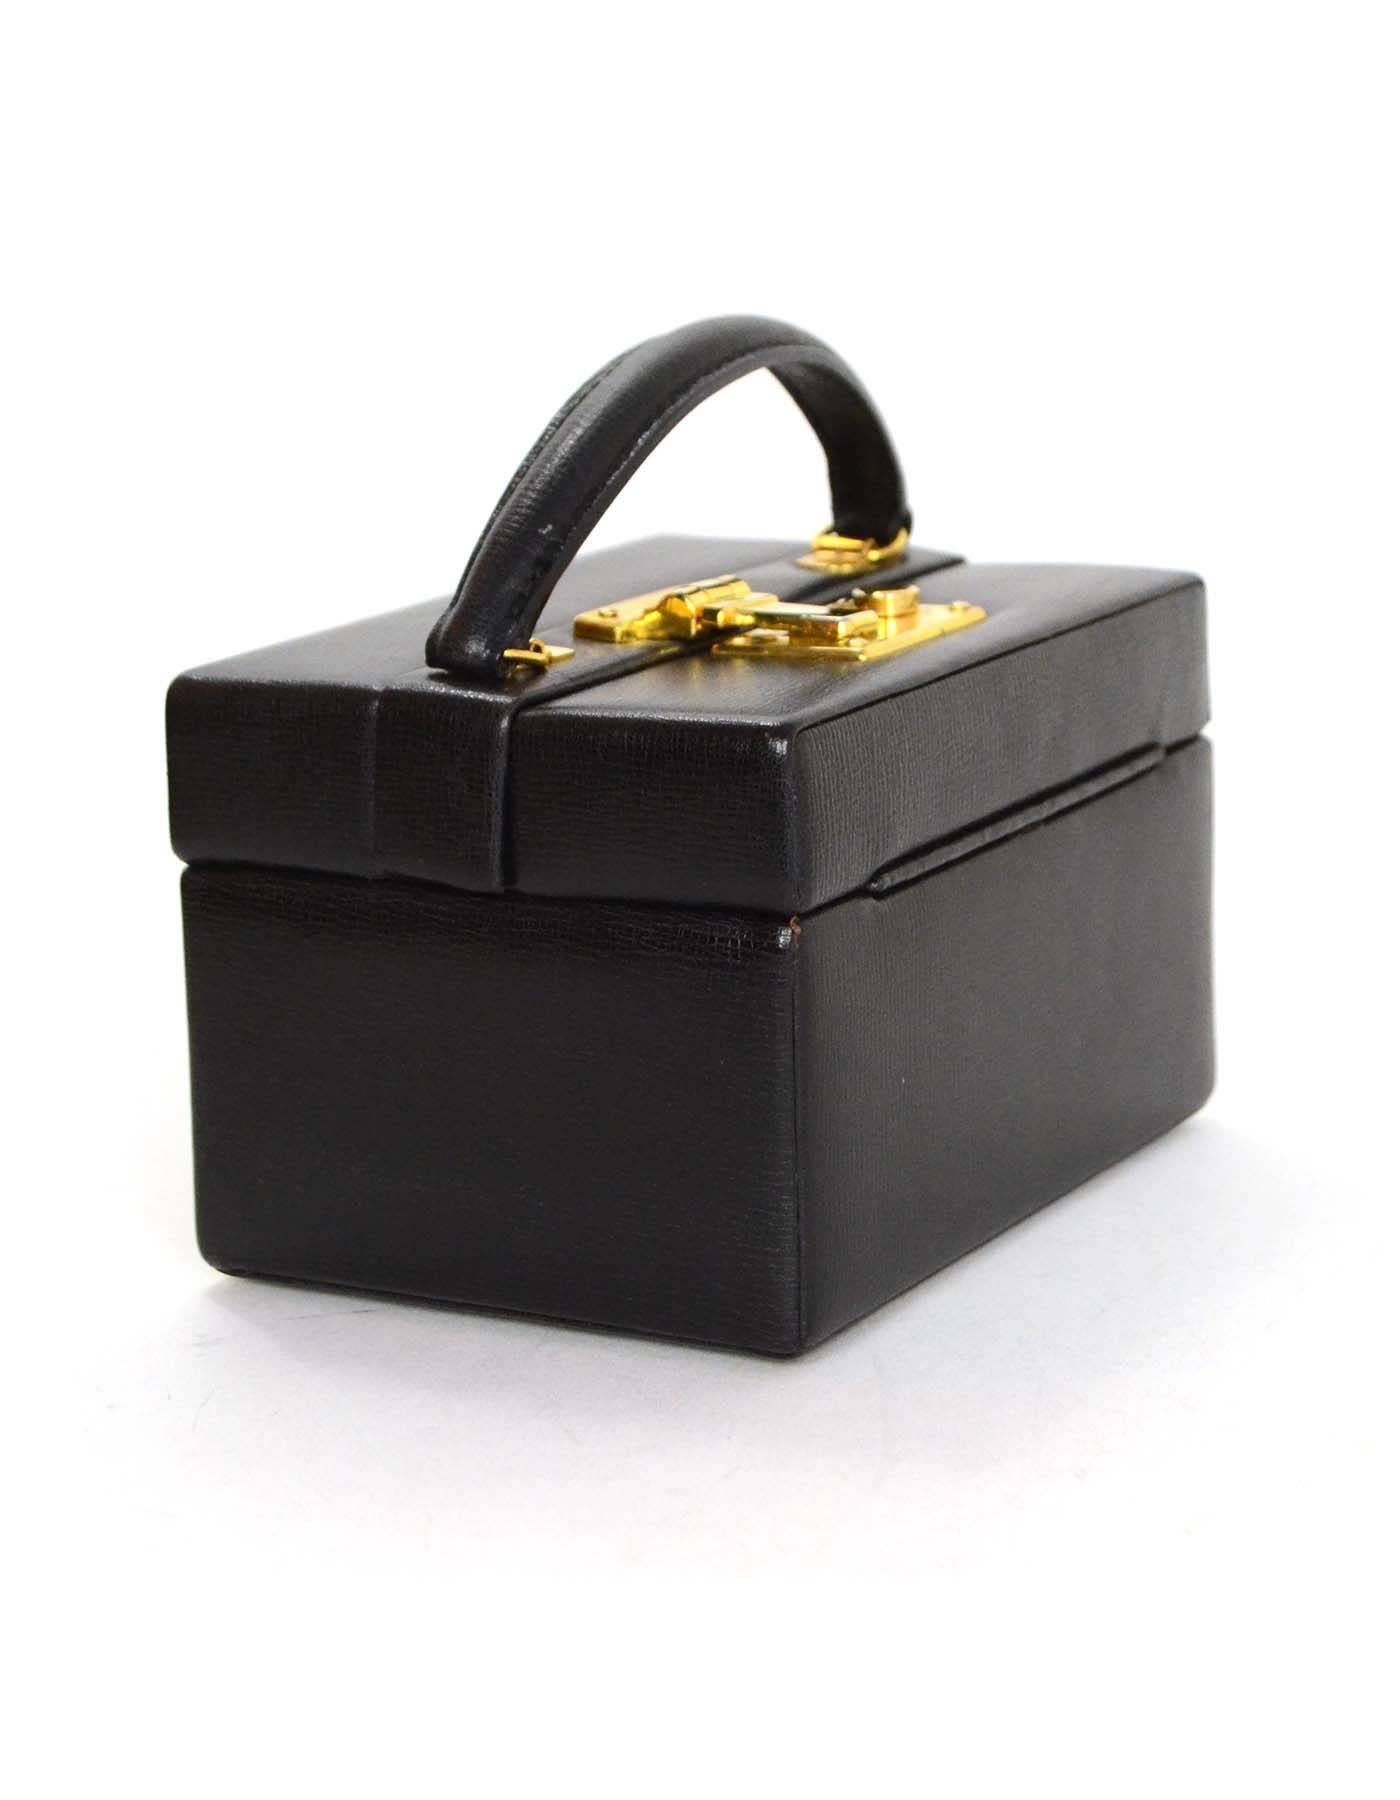 Mark Cross Black Mini Square Frame Bag with GHW

Made in: Italy
Year of Production: Vintage
Color: Black
Hardware: Goldtone
Materials: Leather
Lining: Black leather
Closure/opening: Push lock closure at top
Exterior Pockets: None
Interior